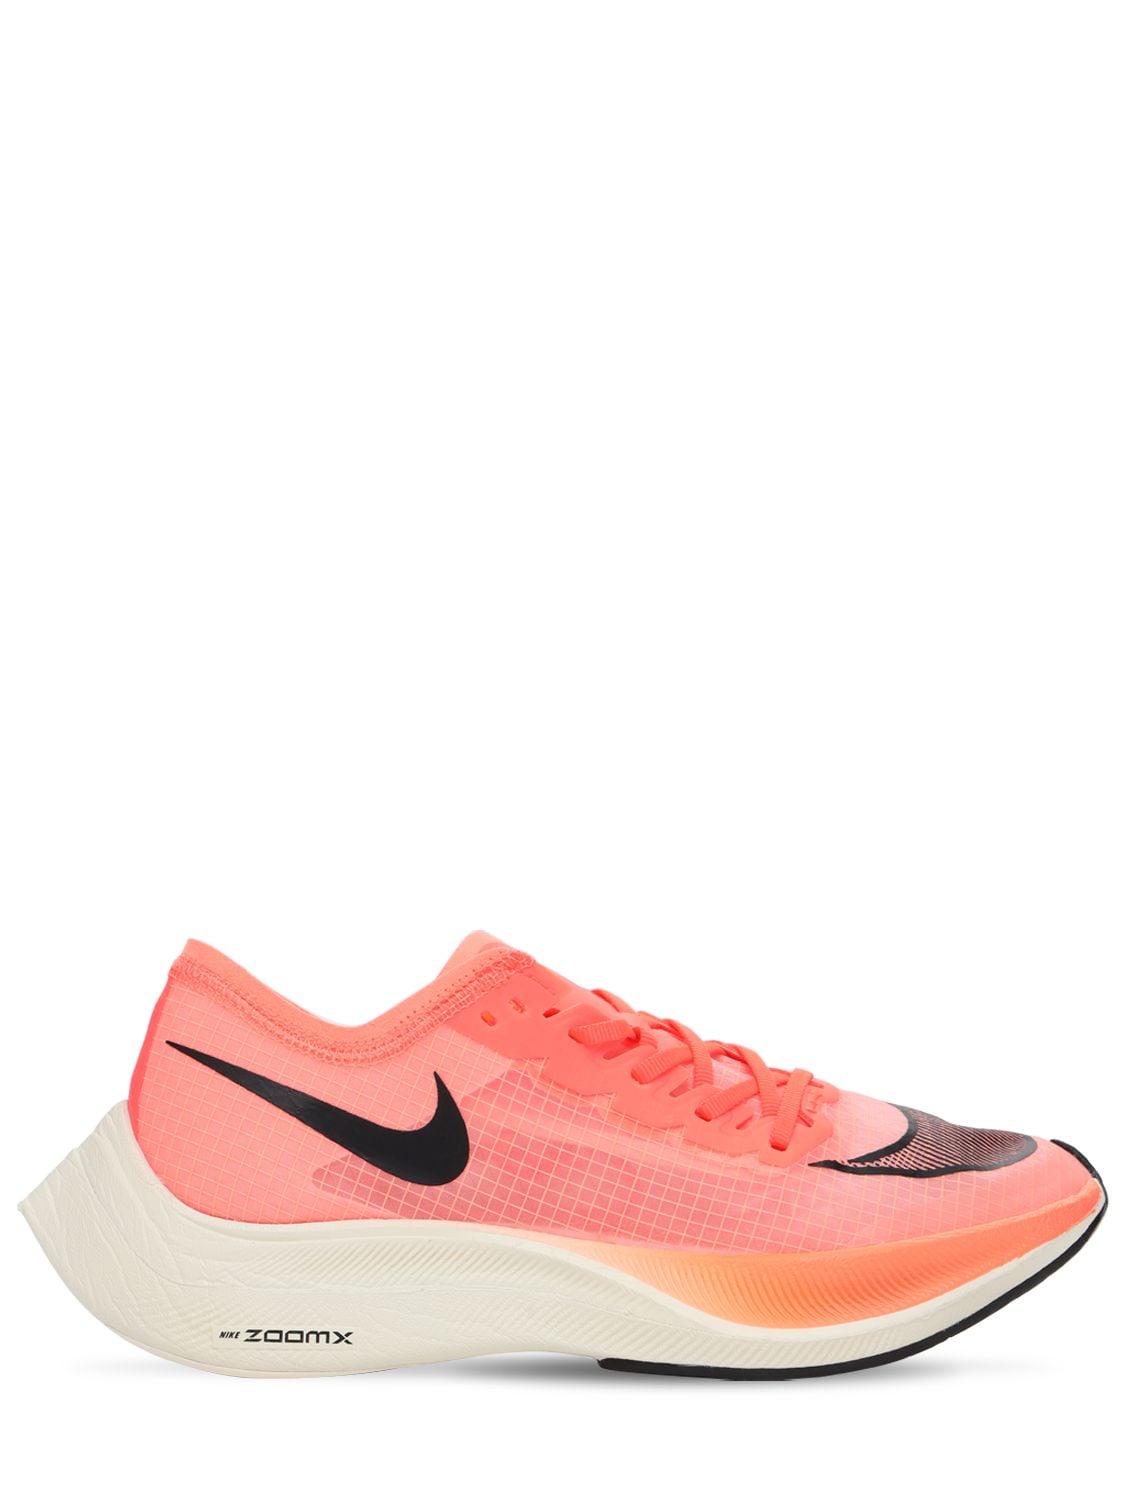 buy vaporfly shoes